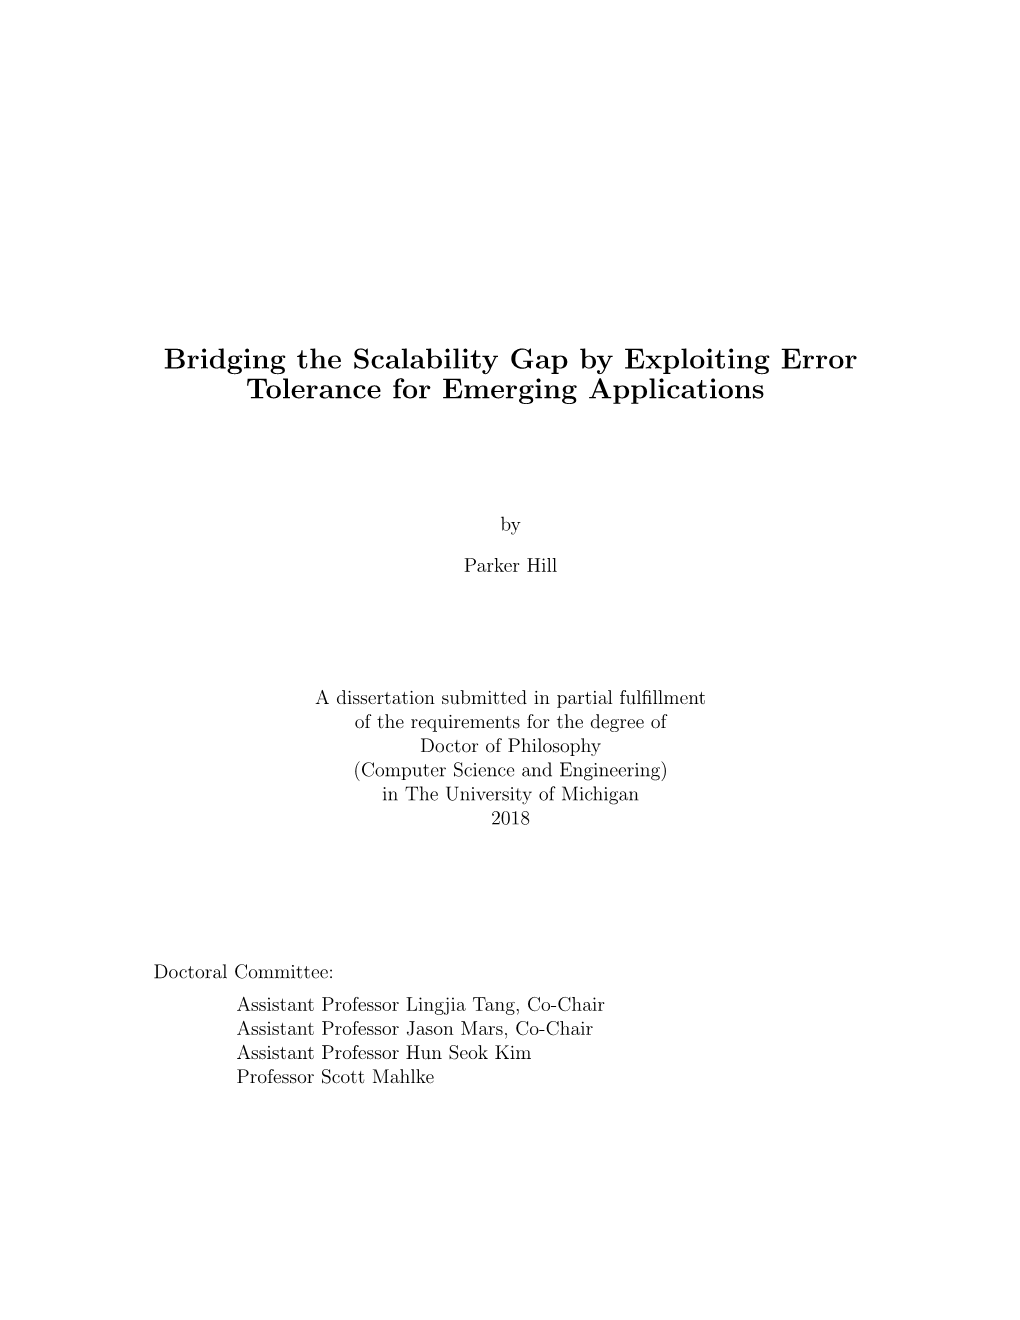 Bridging the Scalability Gap by Exploiting Error Tolerance for Emerging Applications